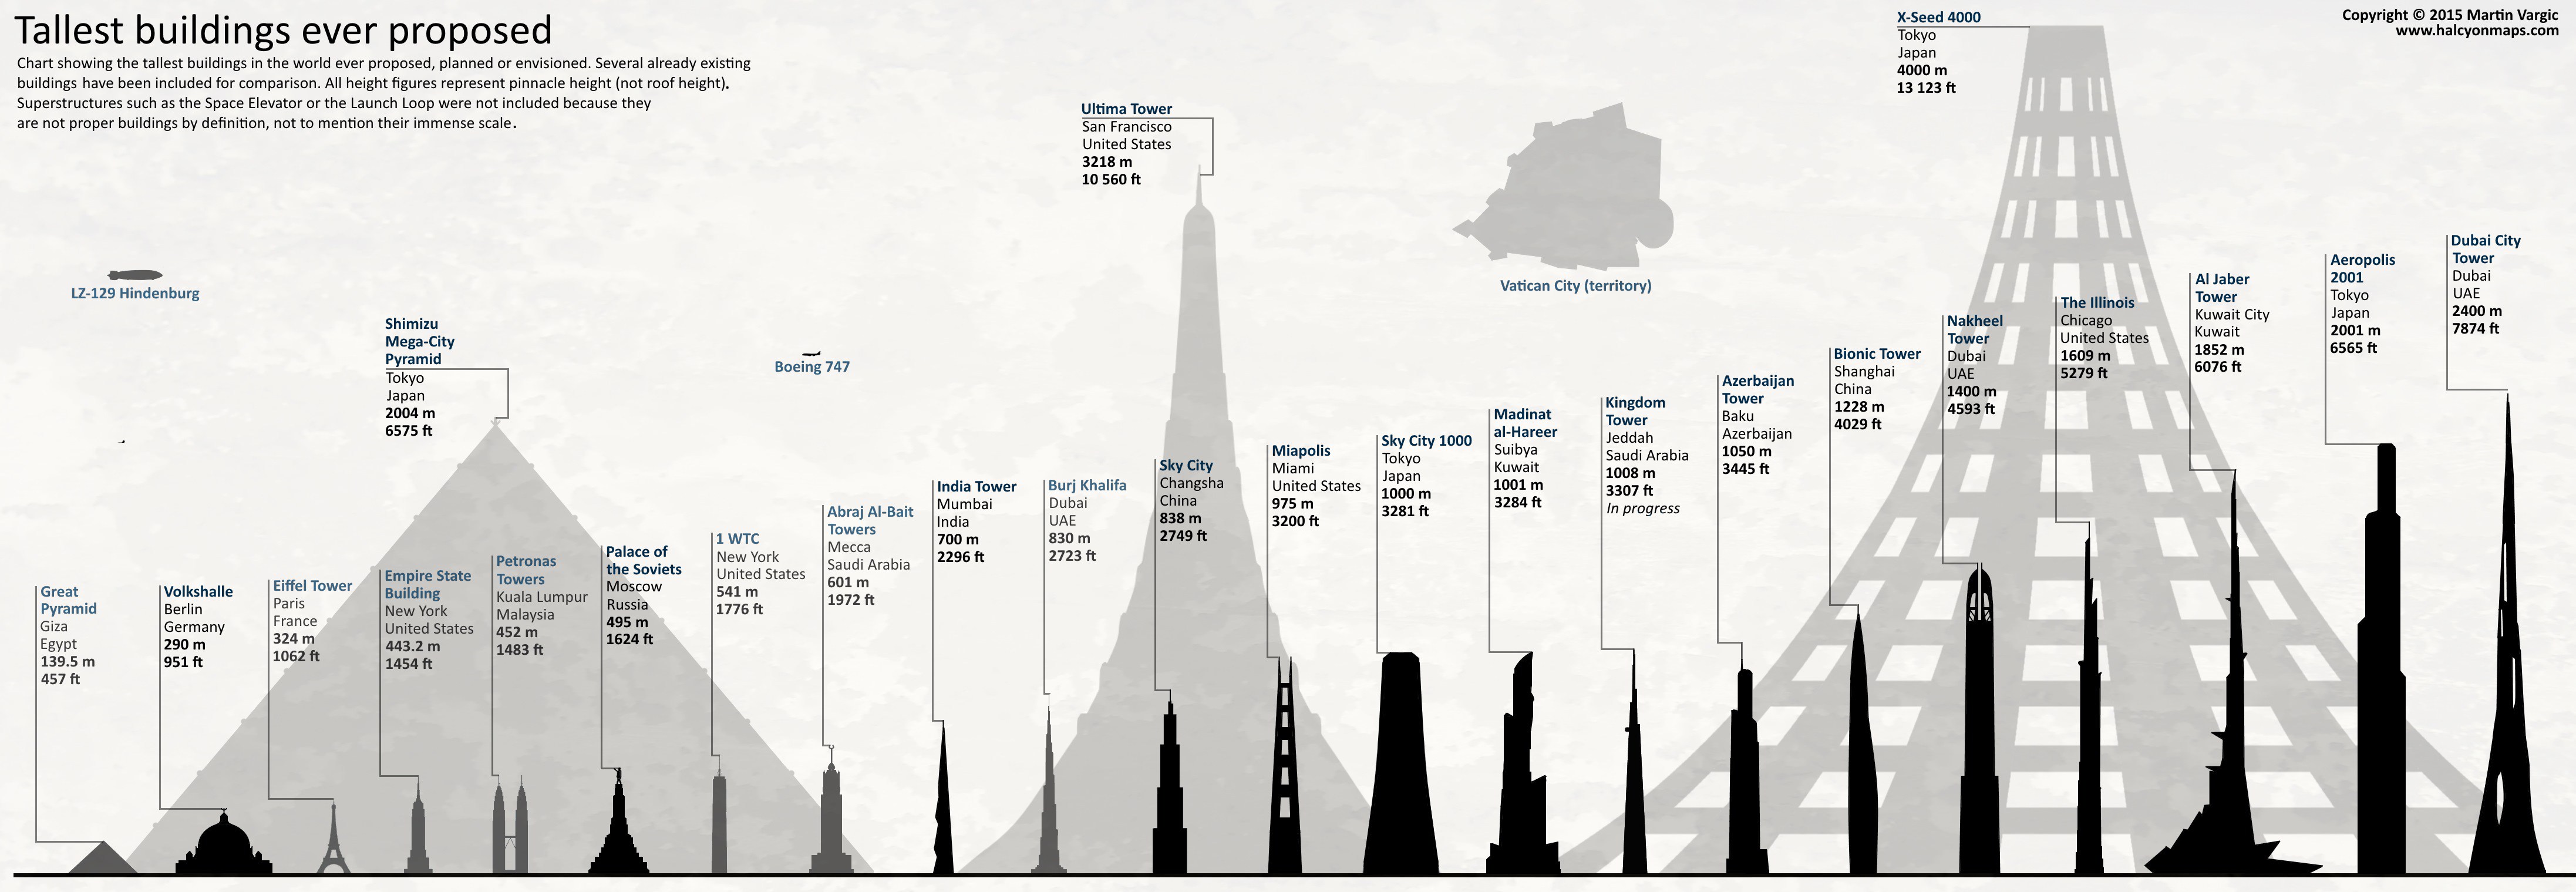 This Handy Chart Shows the Tallest Buildings Ever Proposed - Heads ...